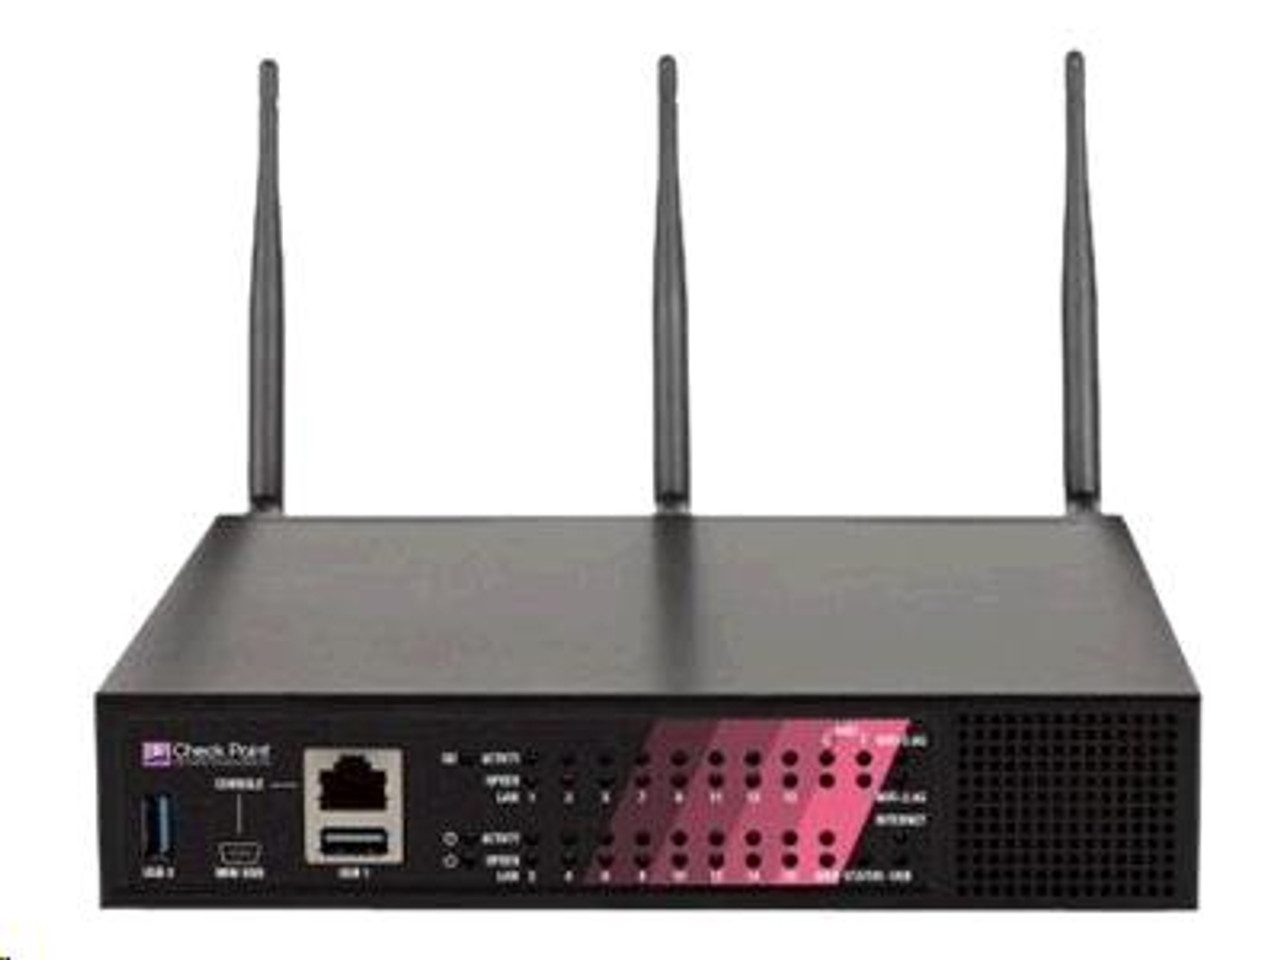 1470 Security Appliance with Threat Prevention Security suite and 80211ac WiFi (India, Chile)